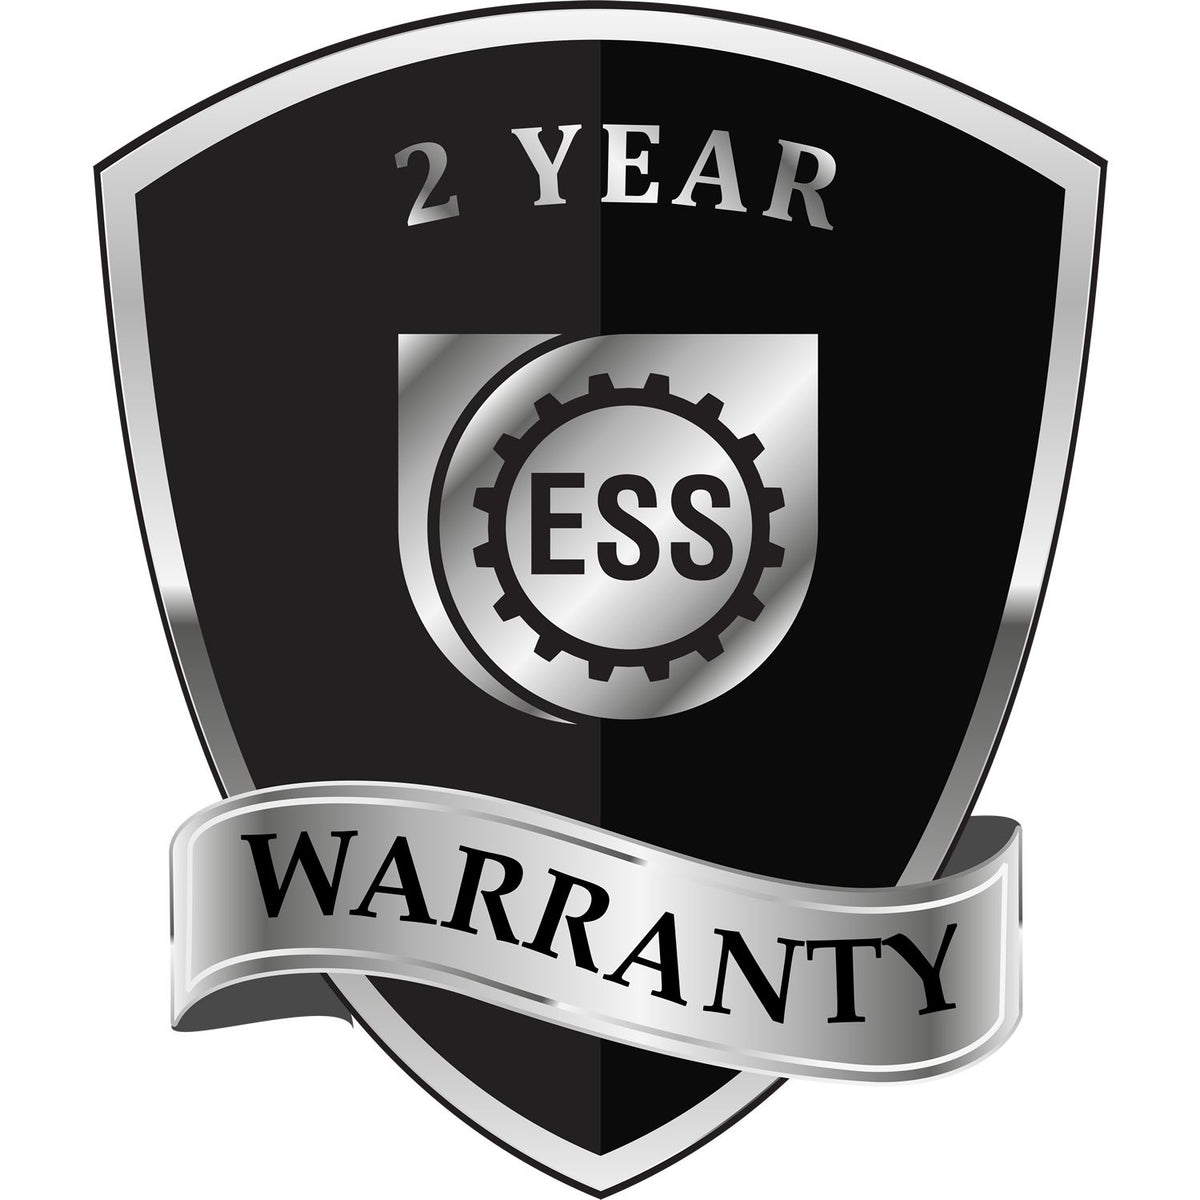 A badge or emblem showing a warranty icon for the Heavy Duty Cast Iron Michigan Engineer Seal Embosser